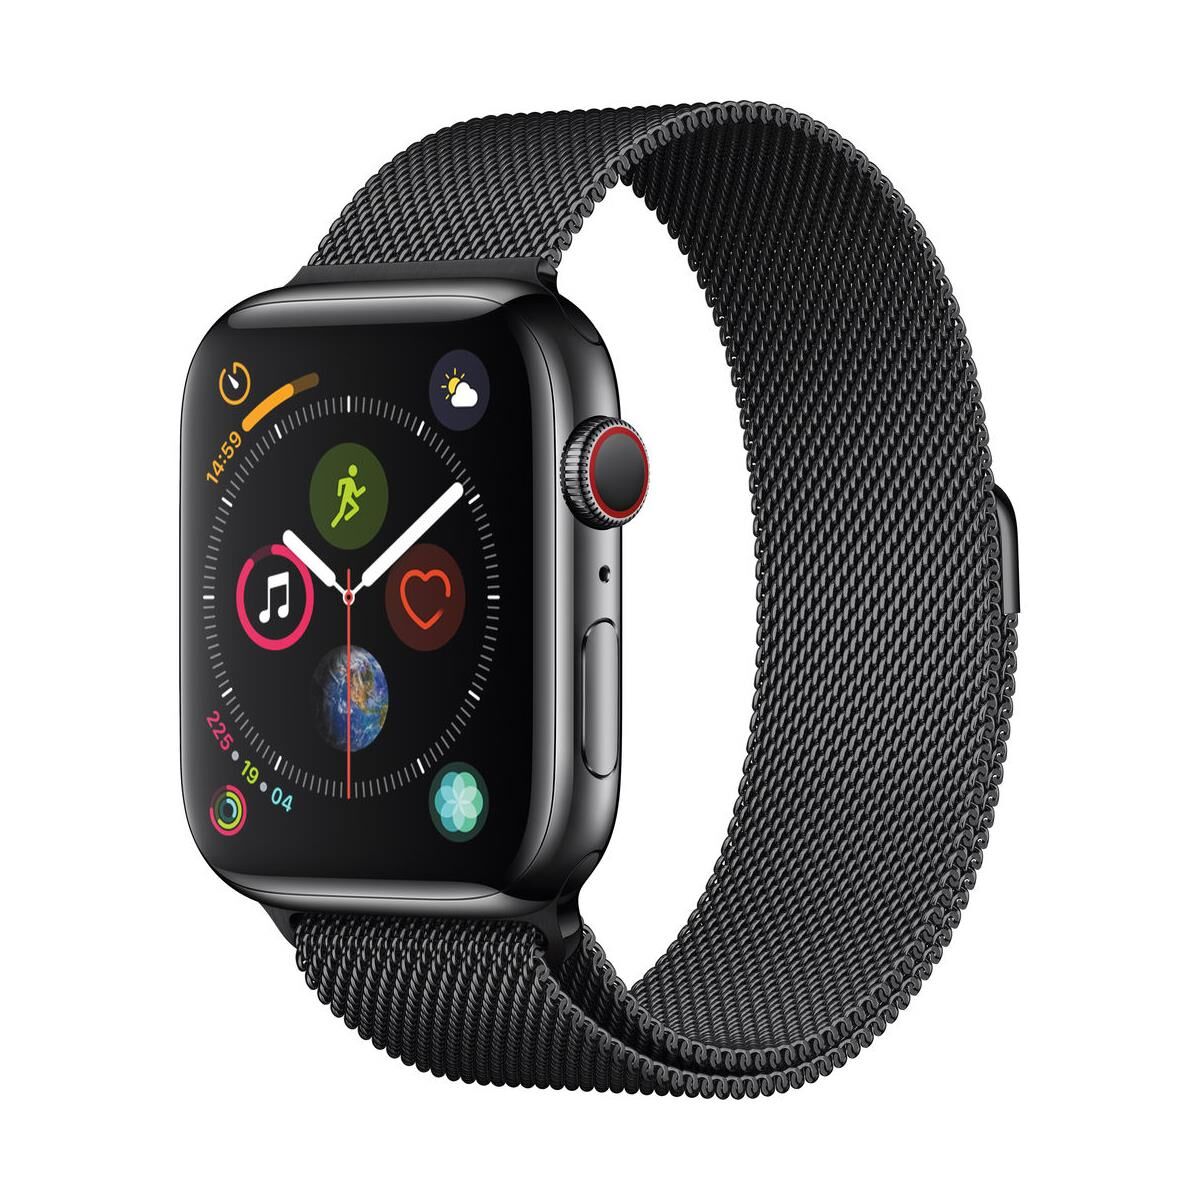 Apple Watch Series 4, GPS+Cell, 44mm, Space Black Stainless,Space Black Milanese